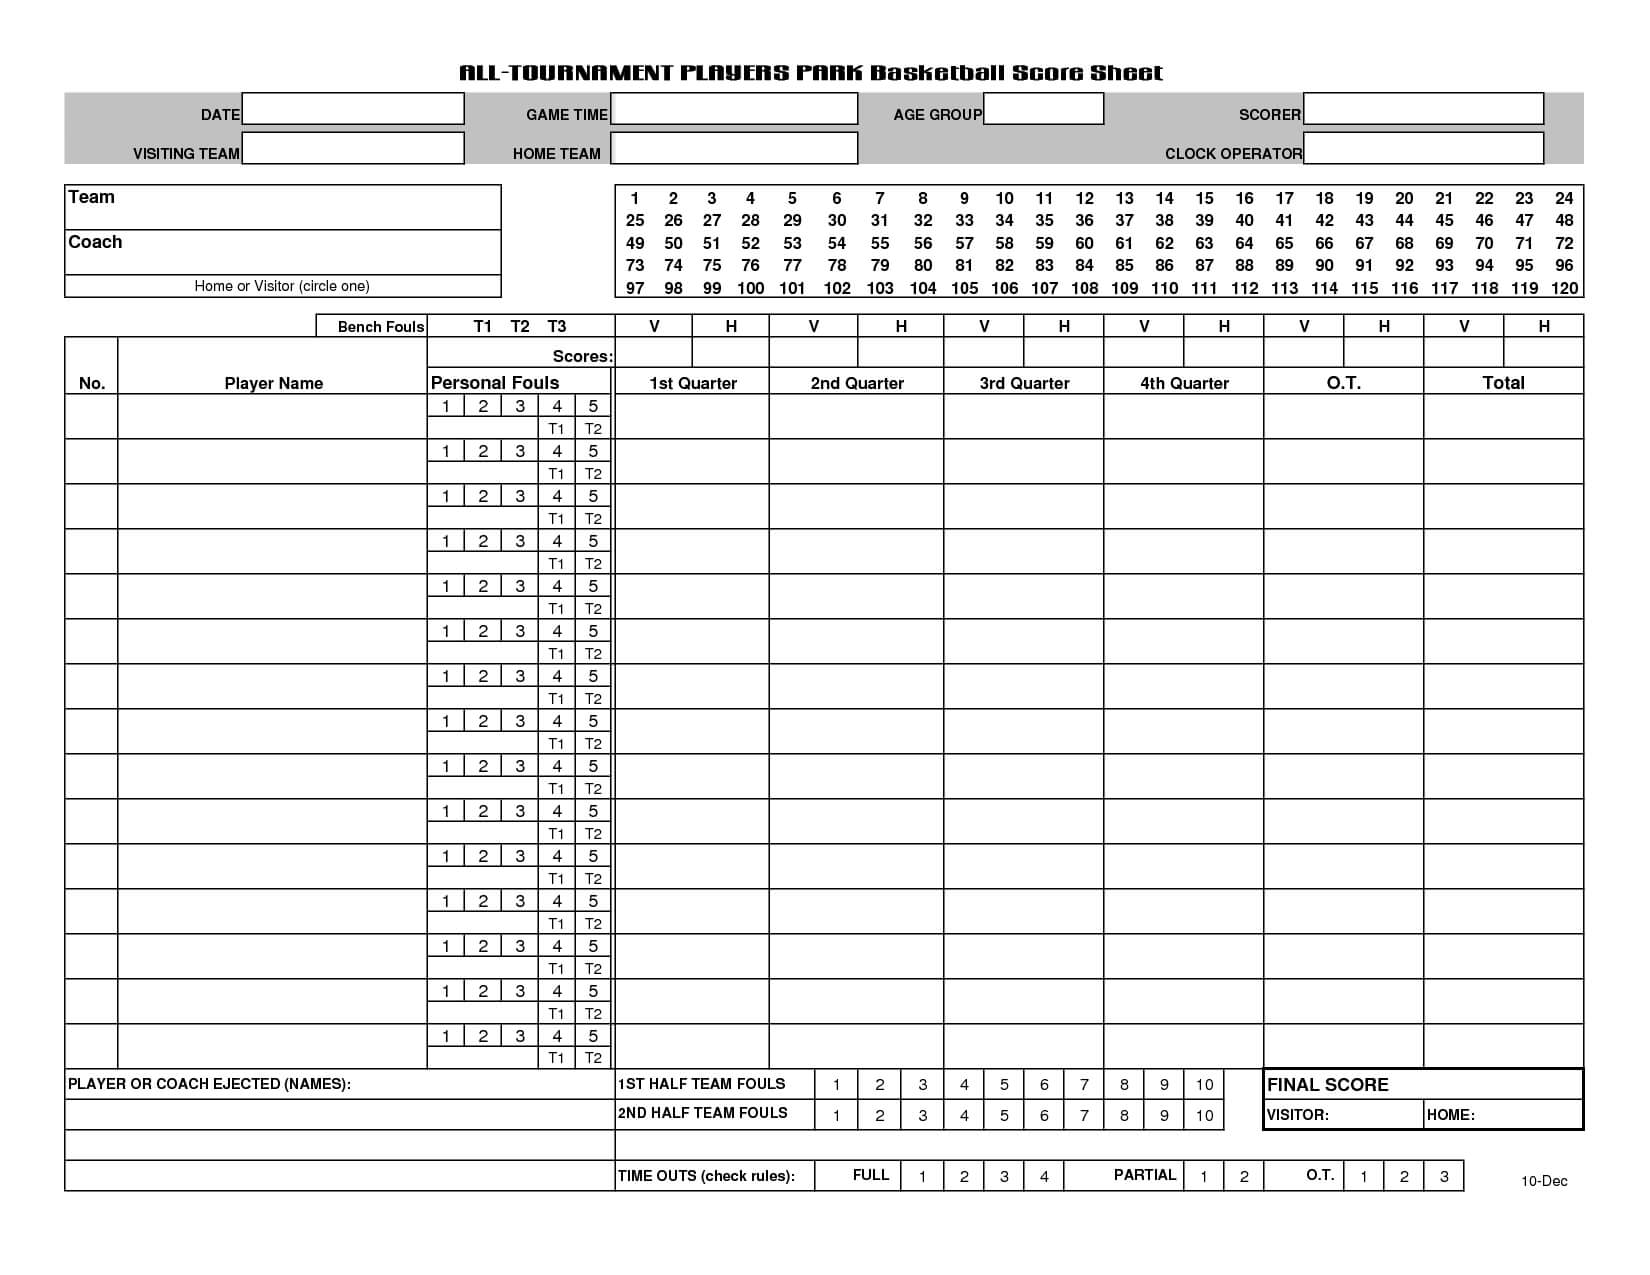 Image Result For Basketball Scorebook Sample Sheet In Basketball Player Scouting Report Template